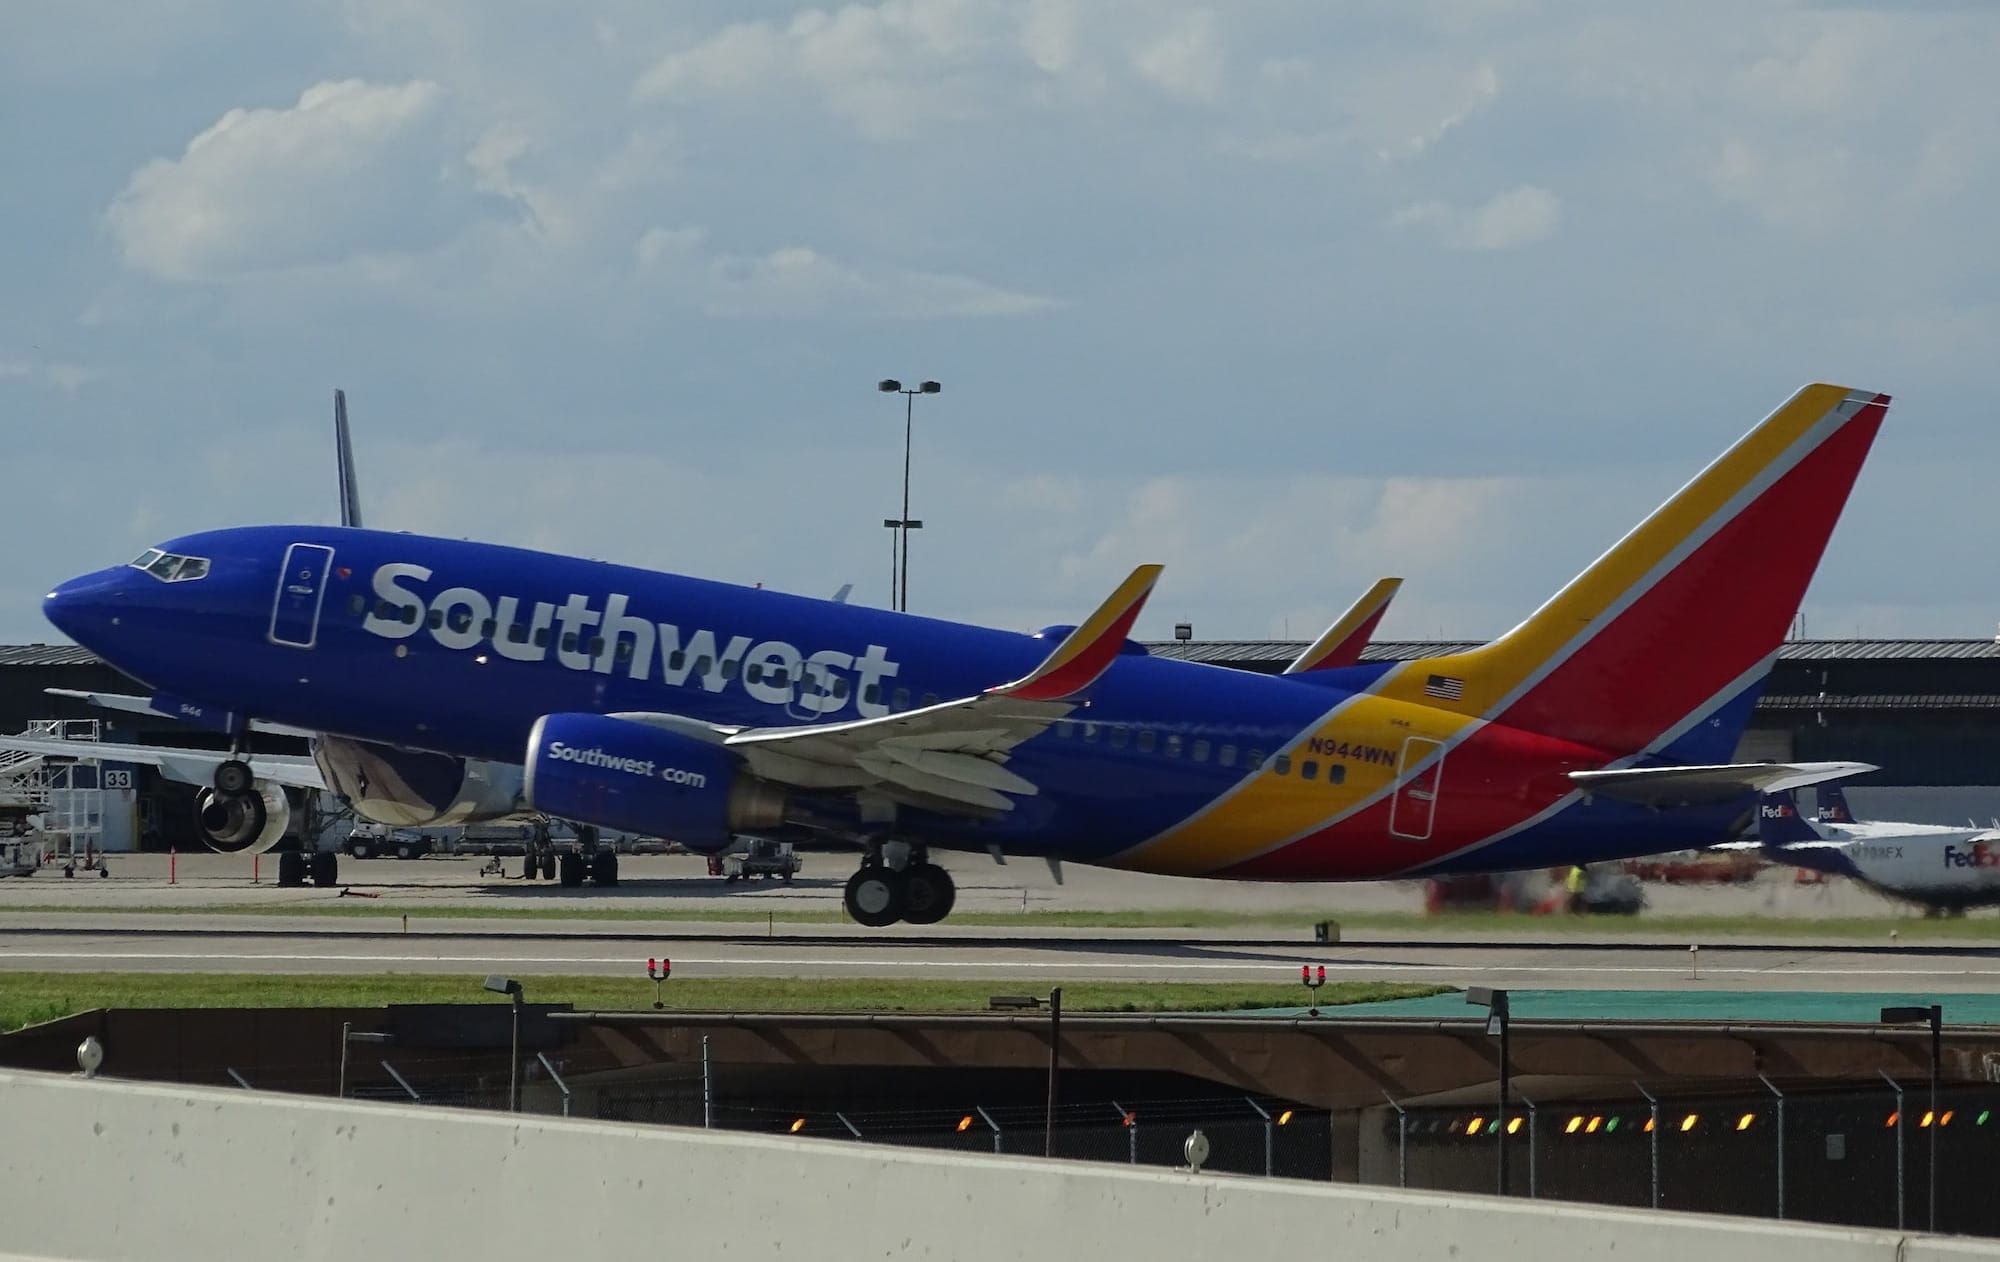 Southwest Airlines Announces Strategic Executive Leadership Changes to Enhance Operations and Customer Experience